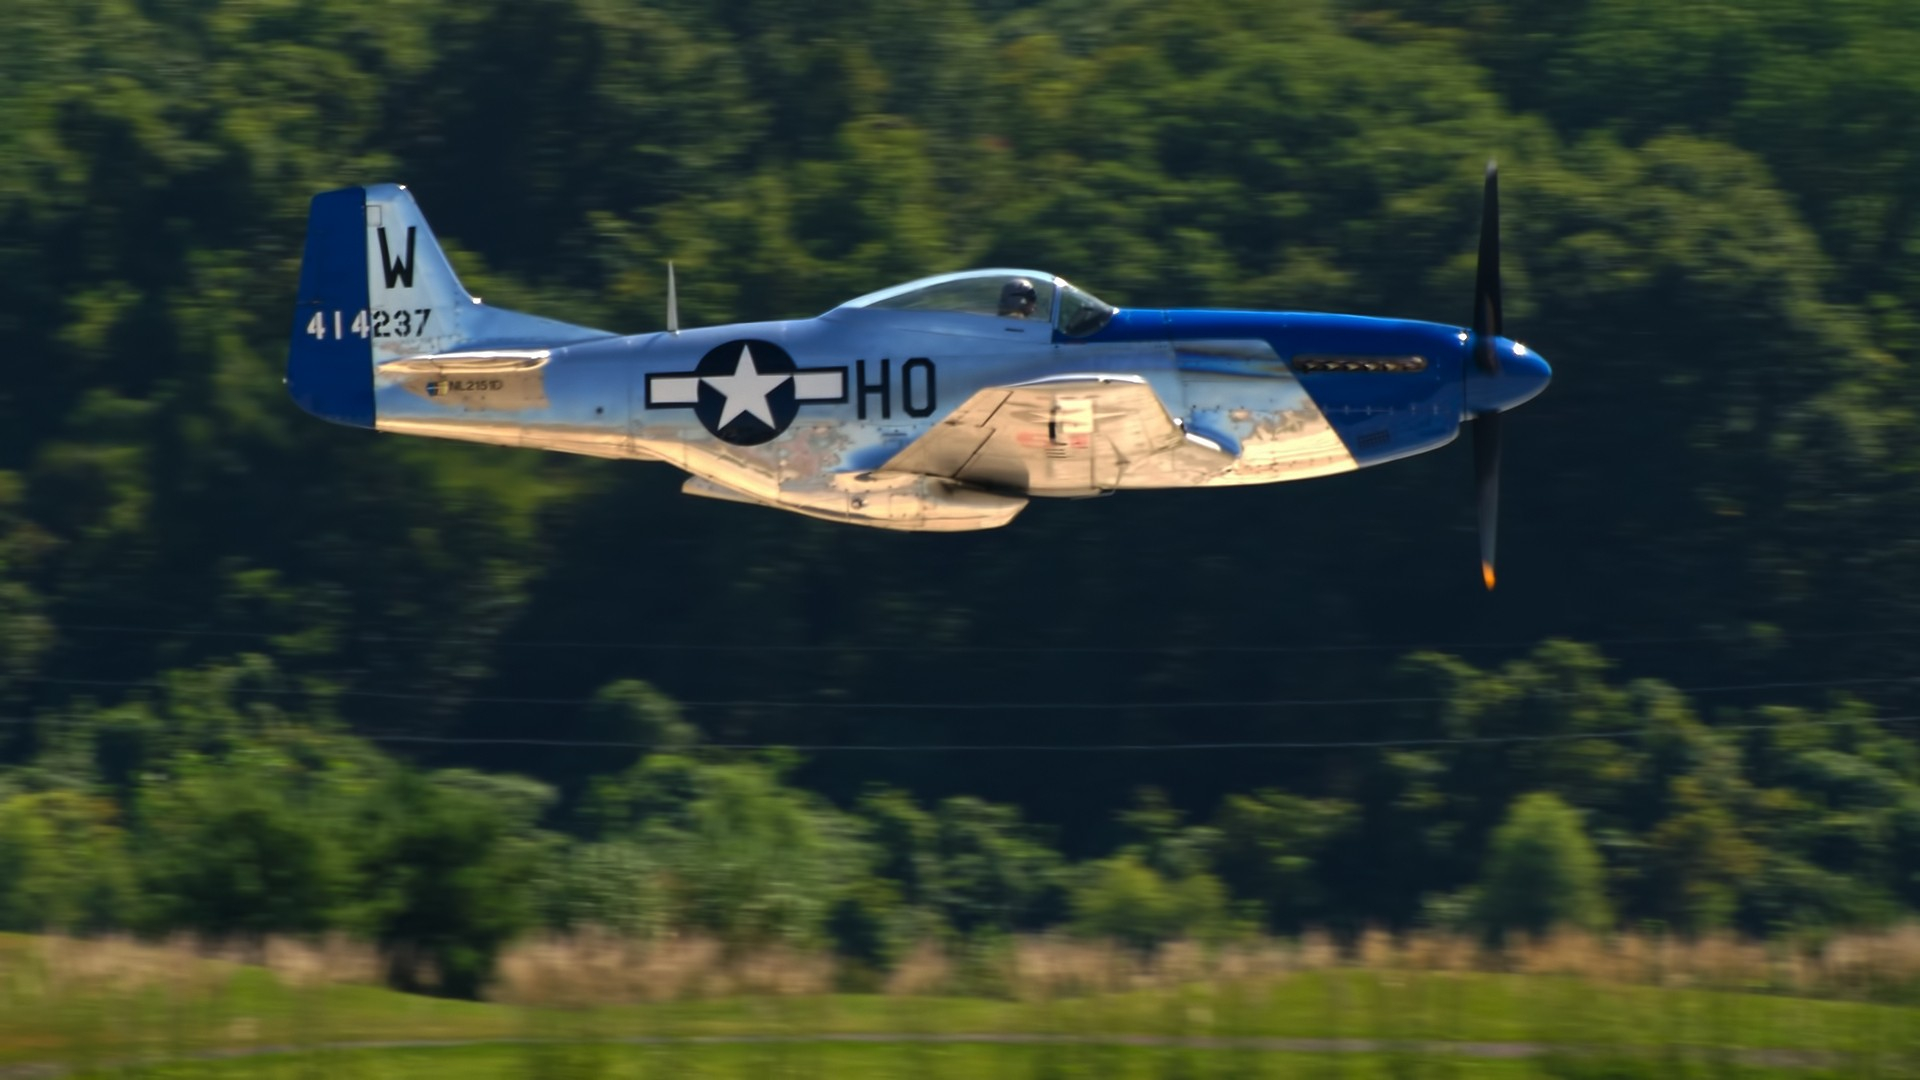 1920x1080 Wallpaper : px, military aircraft, North American P 51 Mustang wallhaven 679467 HD Wallpapers